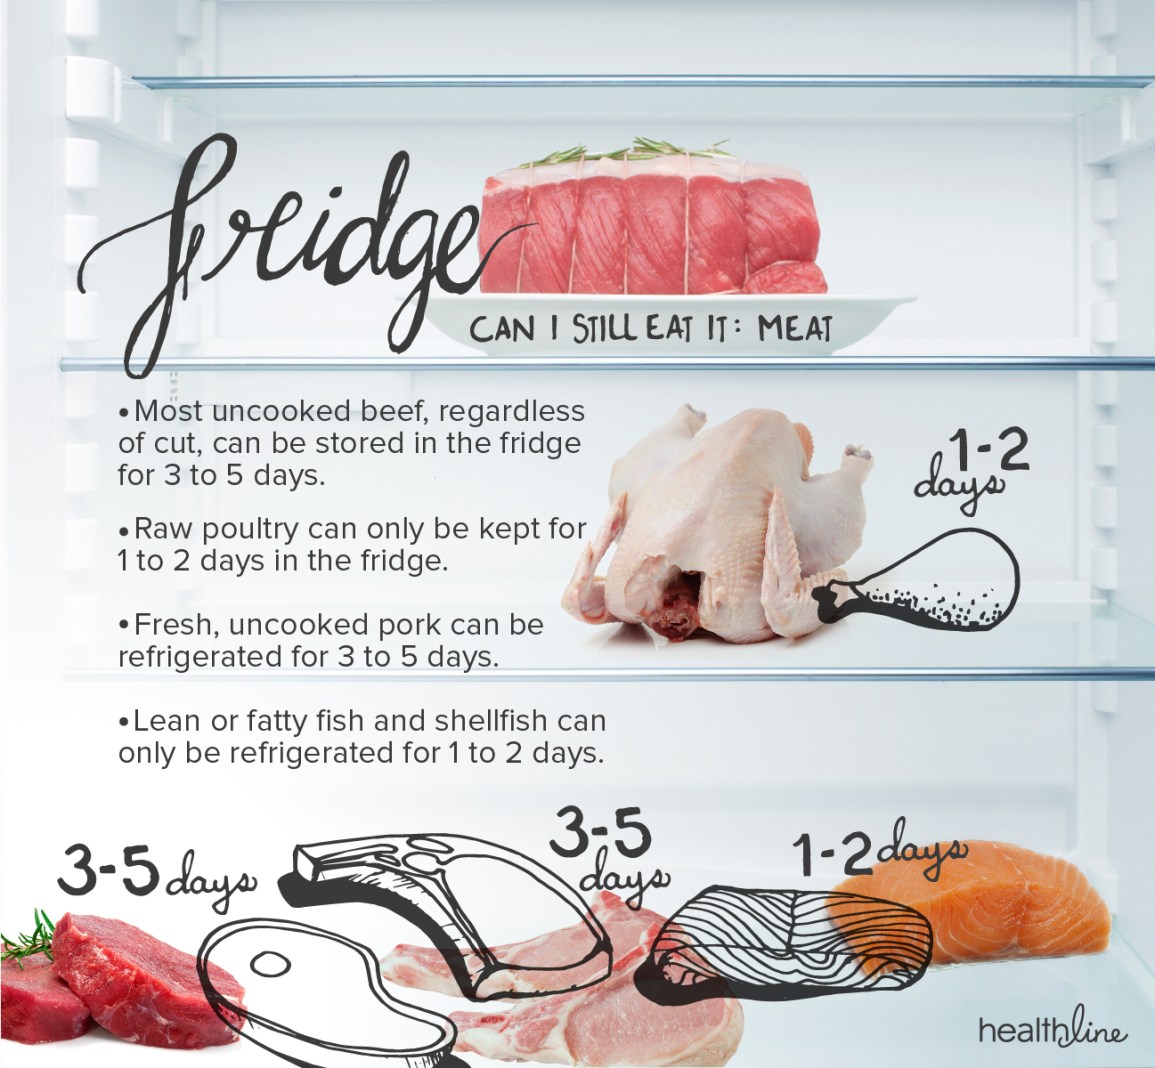 How Long Can You Safely Store Meat?